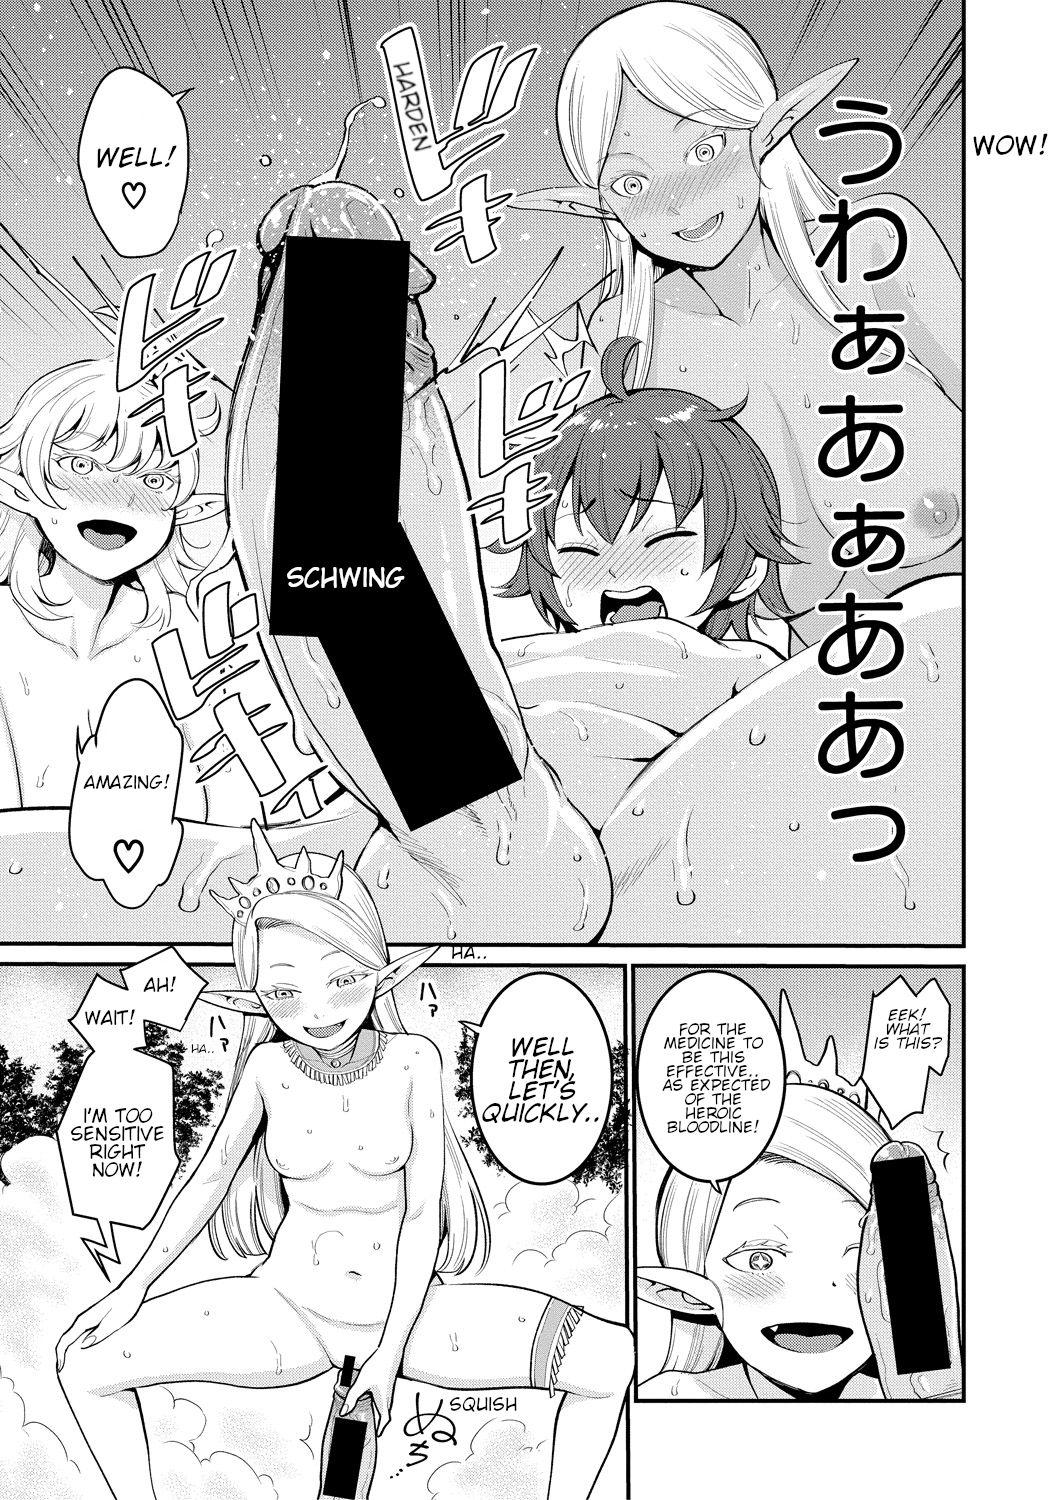 Suck Cock Chintore Quest II: Shota Yuusha Elf no Sato de Dai Rankou | Chintore Quest II: Shota Hero and the Great Elf Village Orgy Girlfriend - Page 13